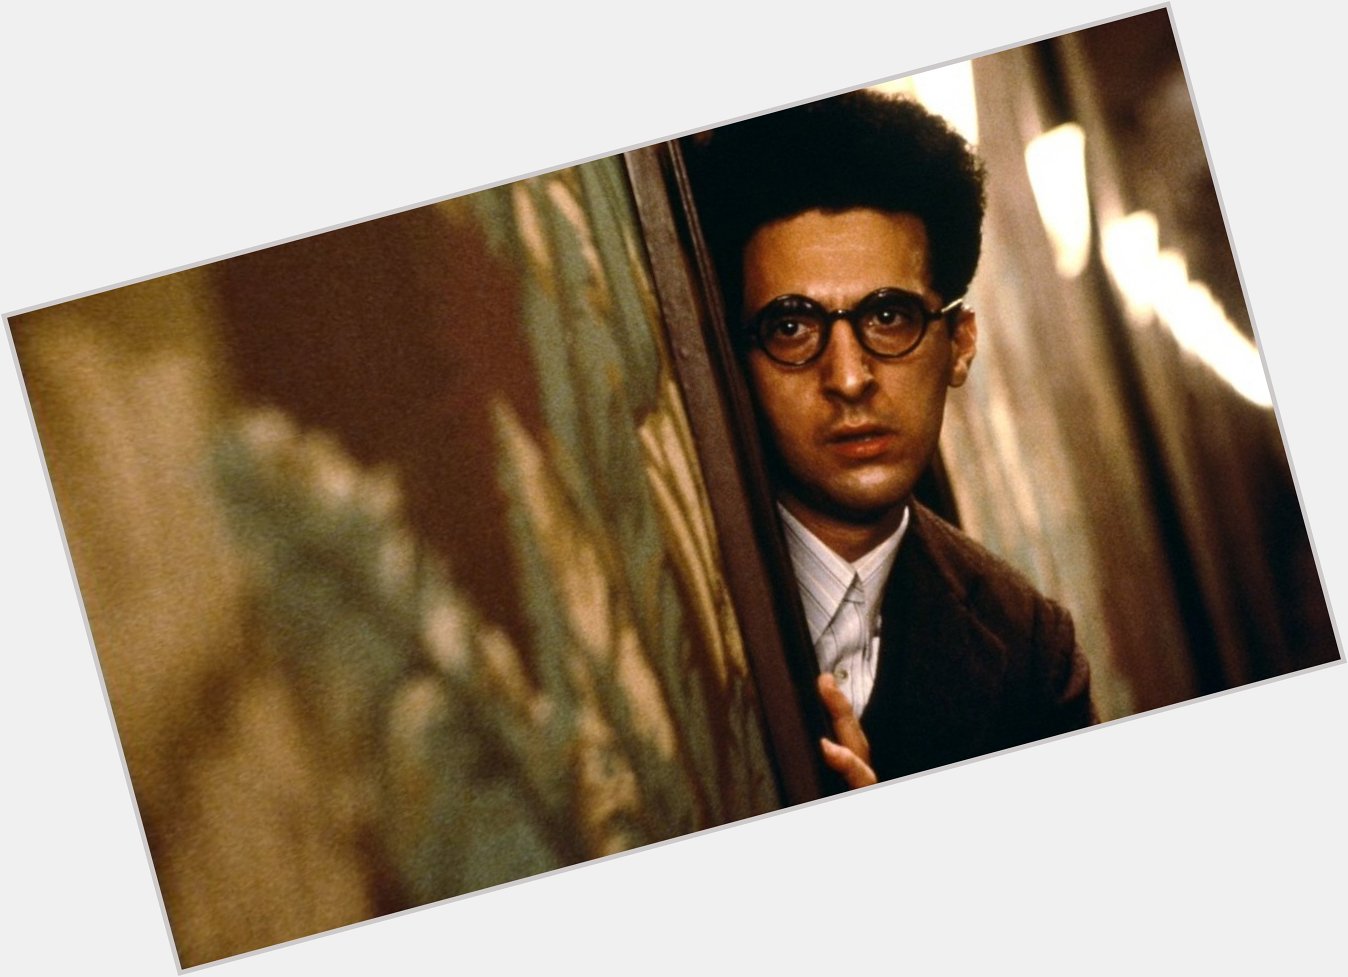 Happy Birthday to a Cohen Brothers muse, John Turturro. 